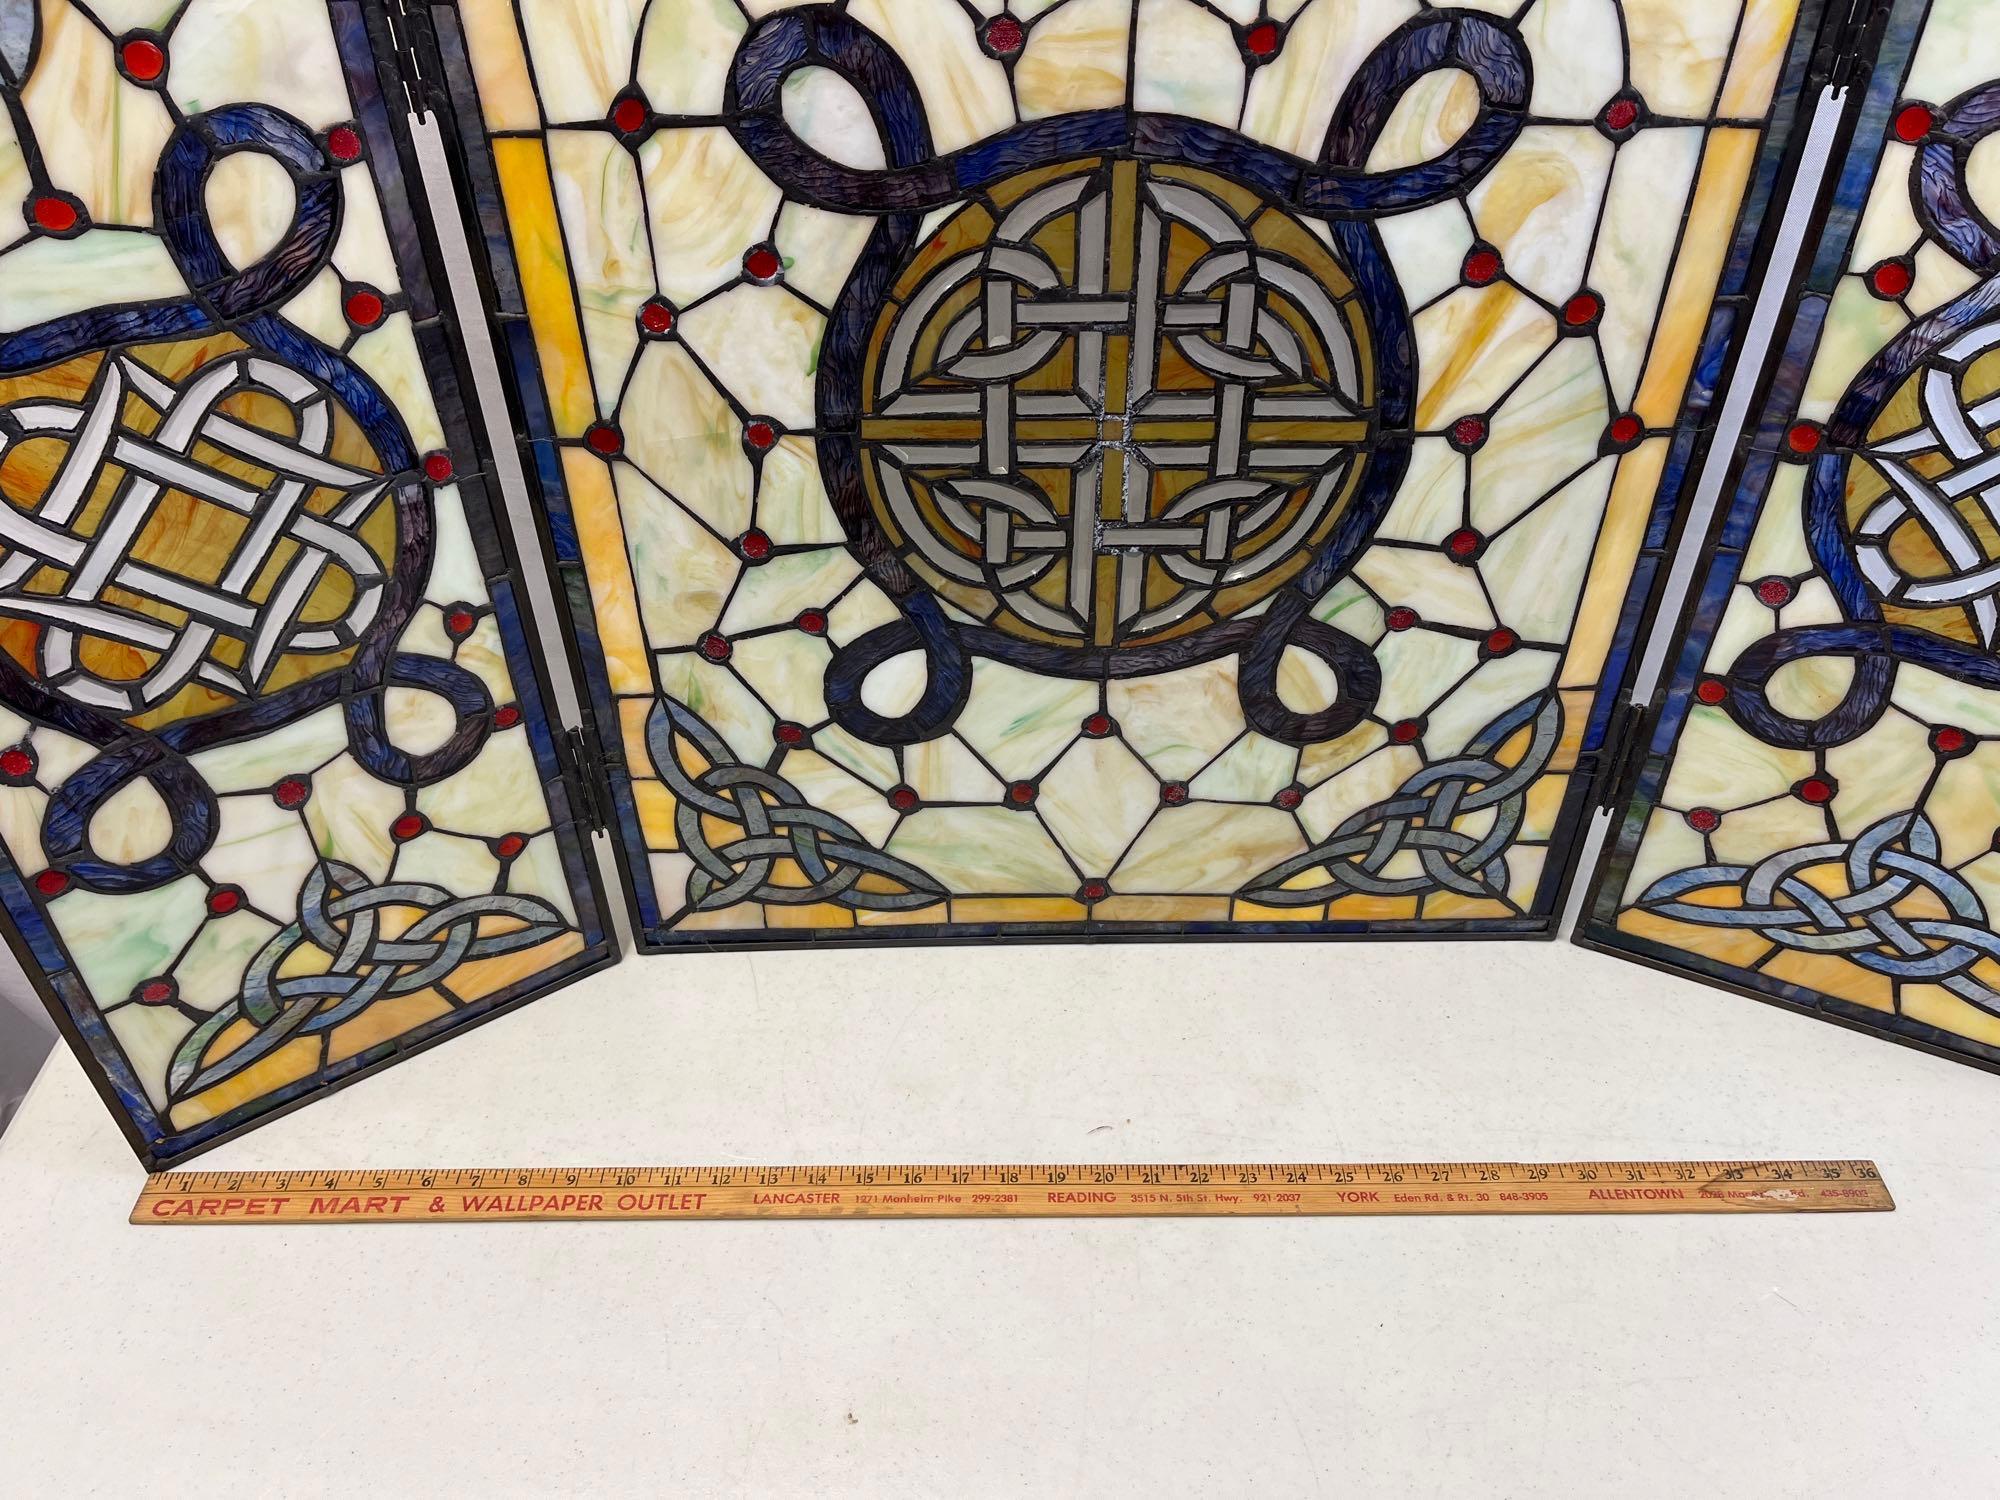 3-Panel Stained Glass with Celtic Knots Design